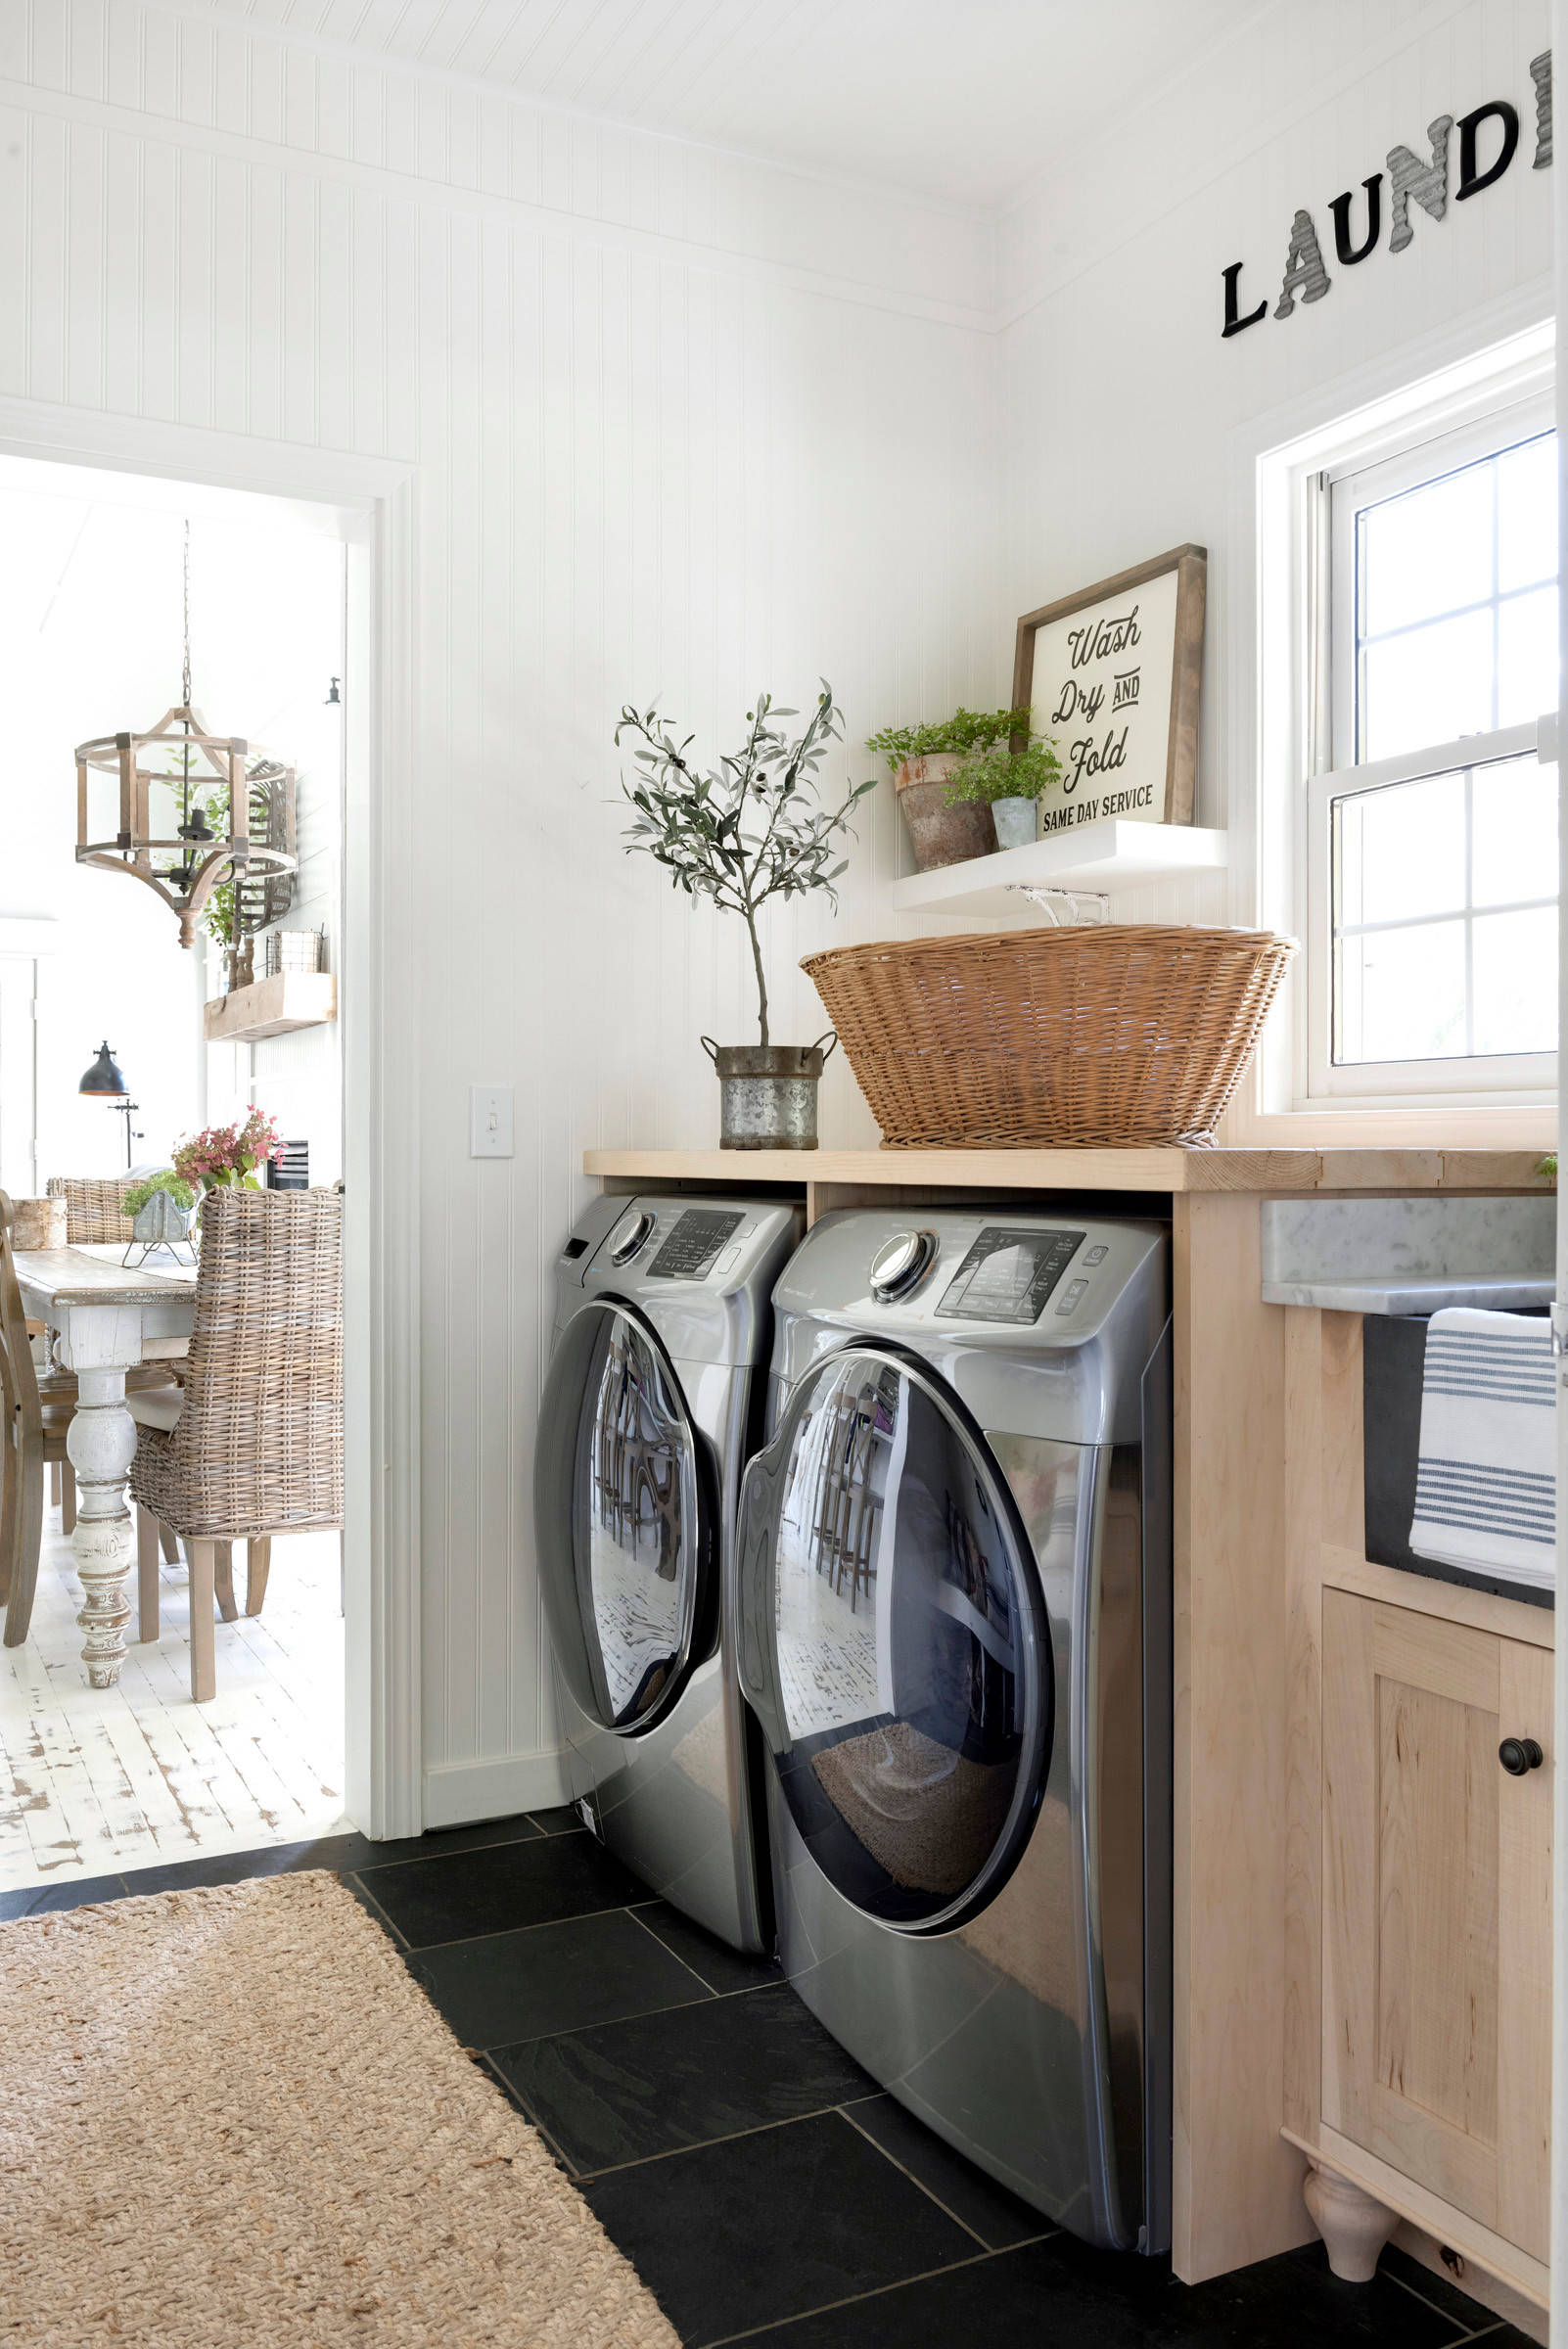 https://st.hzcdn.com/simgs/pictures/laundry-rooms/beautiful-chaos-farmhouse-beautiful-chaos-interior-design-and-styling-img~5061ceff0ce86e78_14-9756-1-a61fa67.jpg